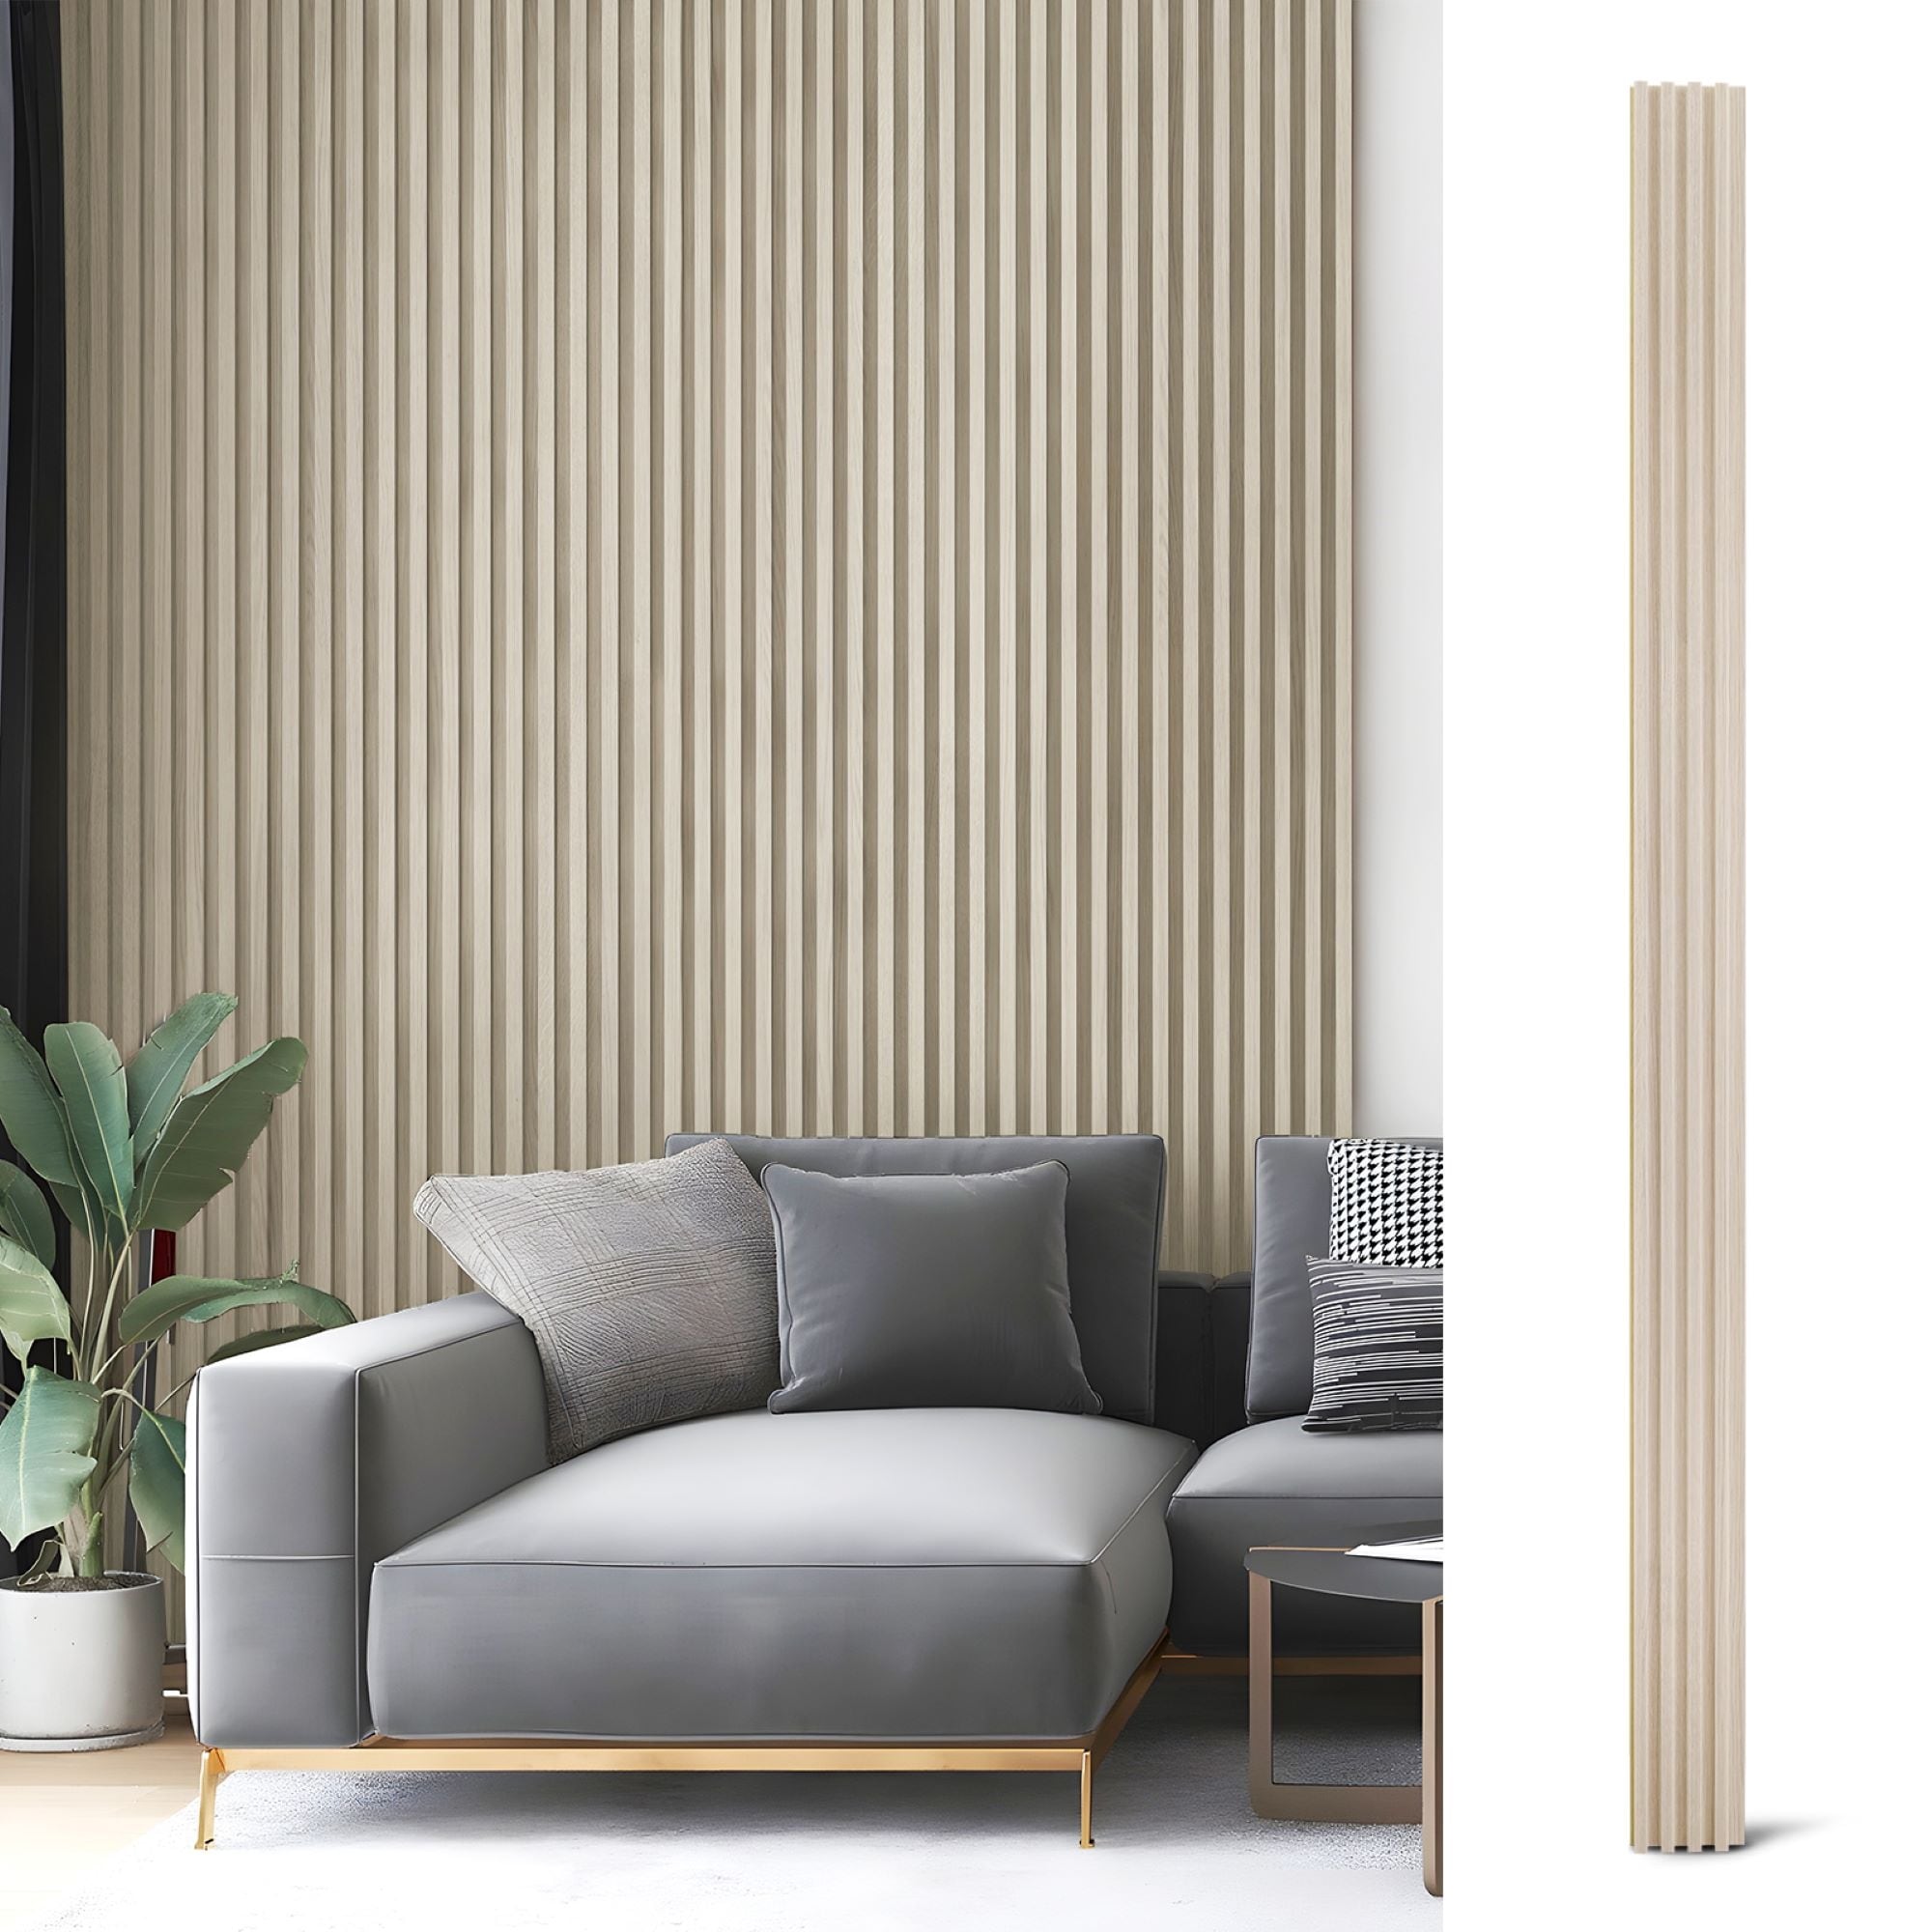 Art3d 4 Wood Slat Acoustic Panels for Wall and Ceiling - 3D Fluted Sound  Absorbing Panel with Wood Finish